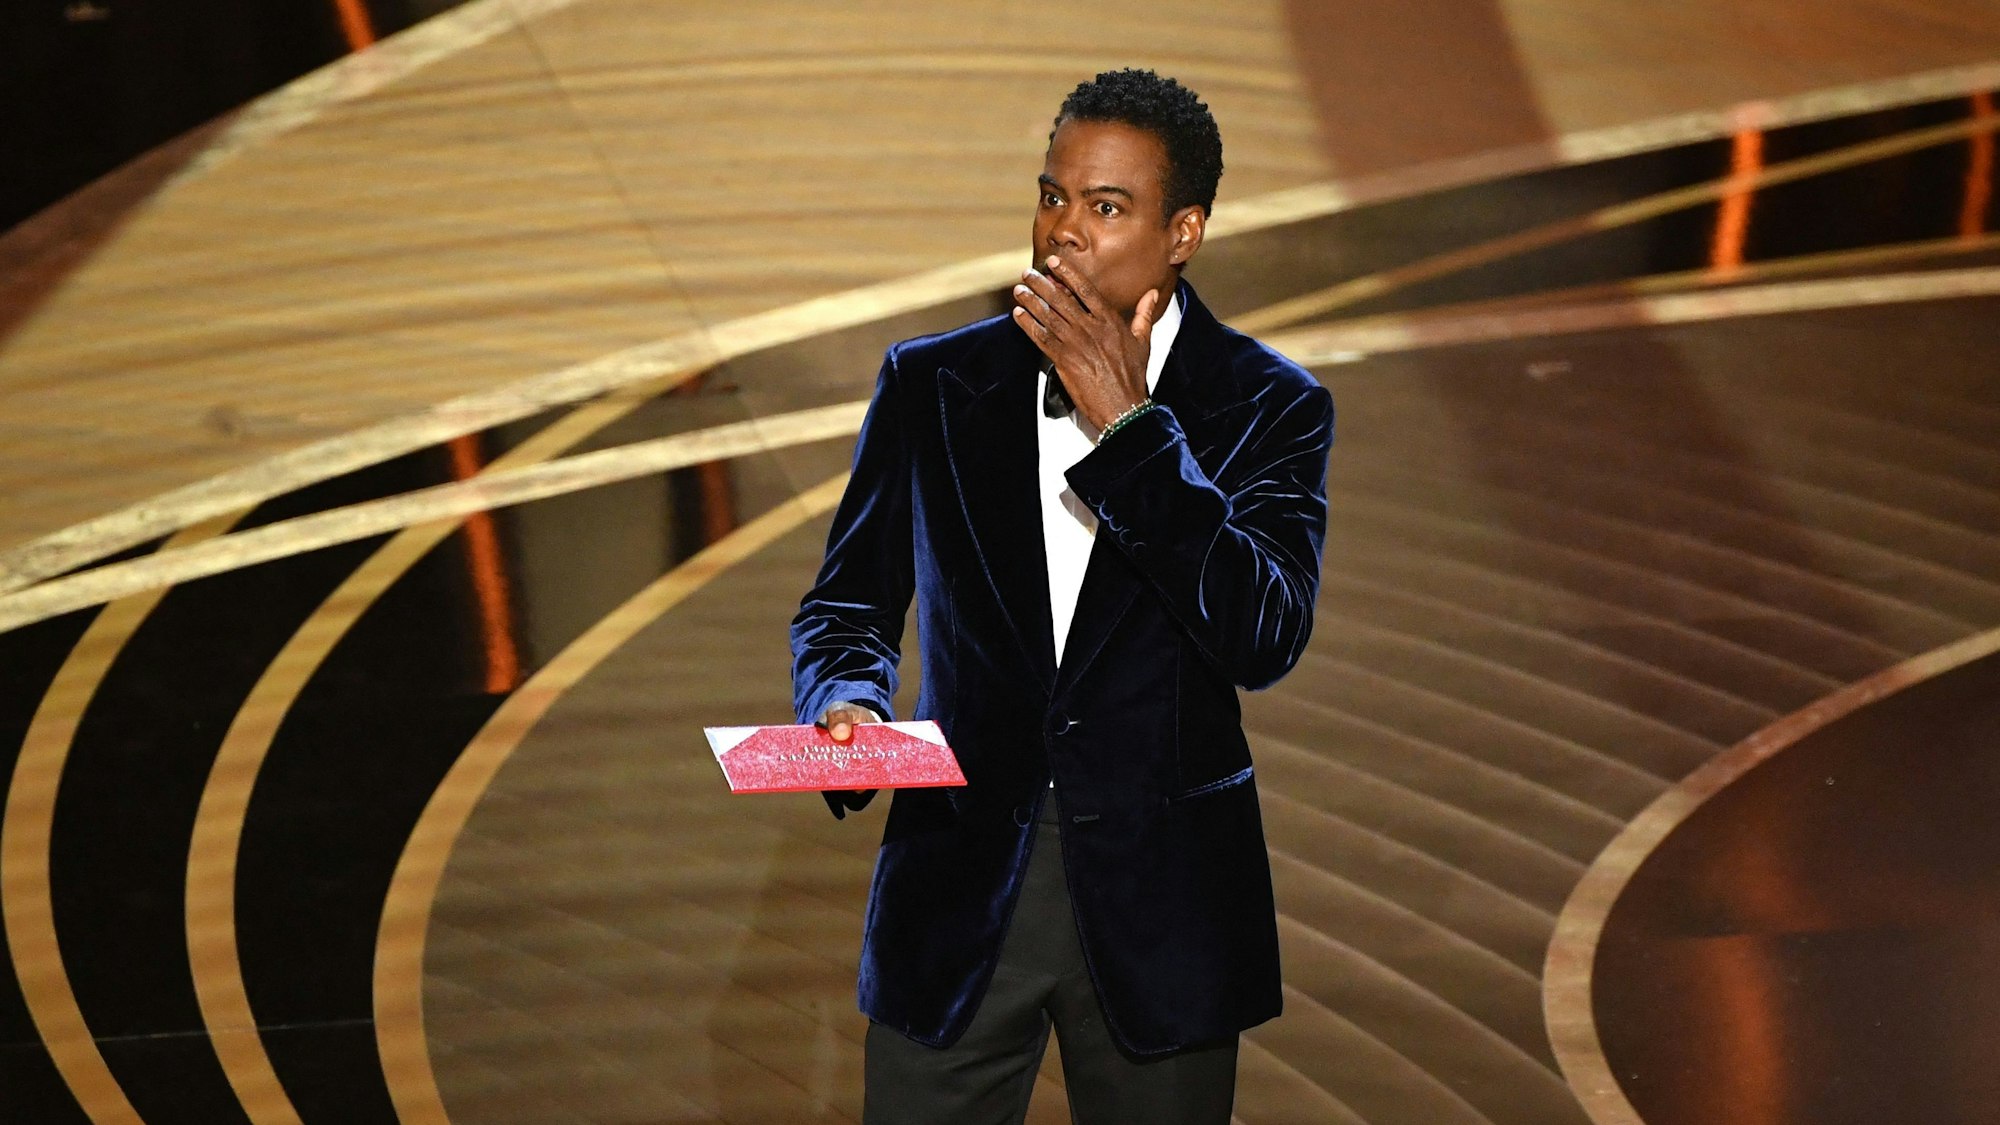 (FILES) In this file photo taken on March 27, 2022 US actor Chris Rock speaks onstage during the 94th Oscars at the Dolby Theatre in Hollywood, California. - Chris Rock finally hit back at Will Smith on March 4, 2023 in a brutal stand-up routine, a year after the actor slapped him in front of a global TV audience for the Oscars. (Photo by Robyn Beck / AFP)